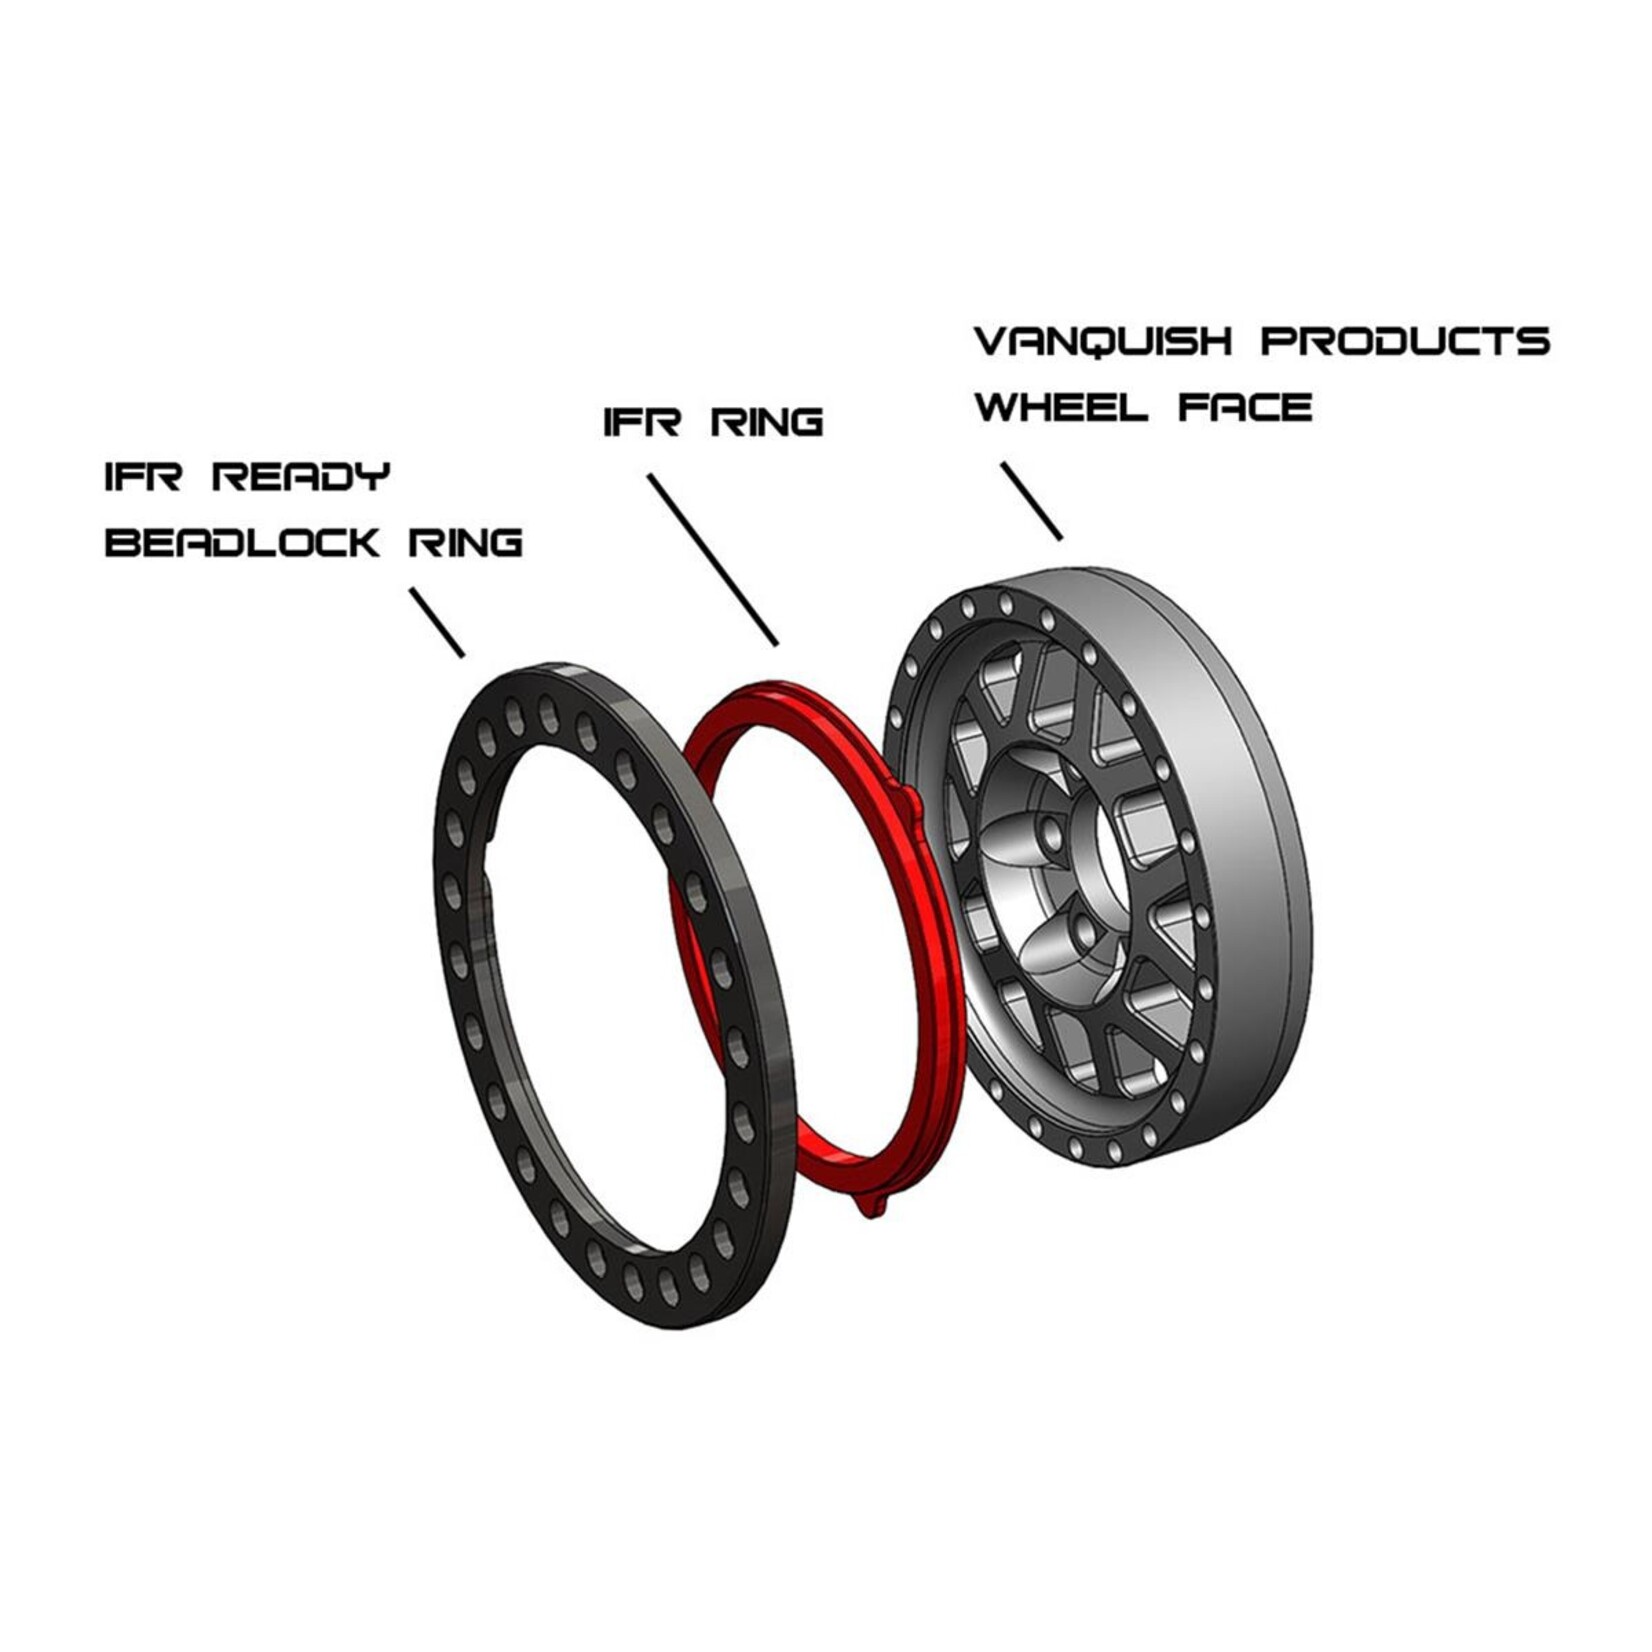 Vanquish Products Vanquish Products 1.9" Omni IFR Inner Ring (Bronze) #VPS05466